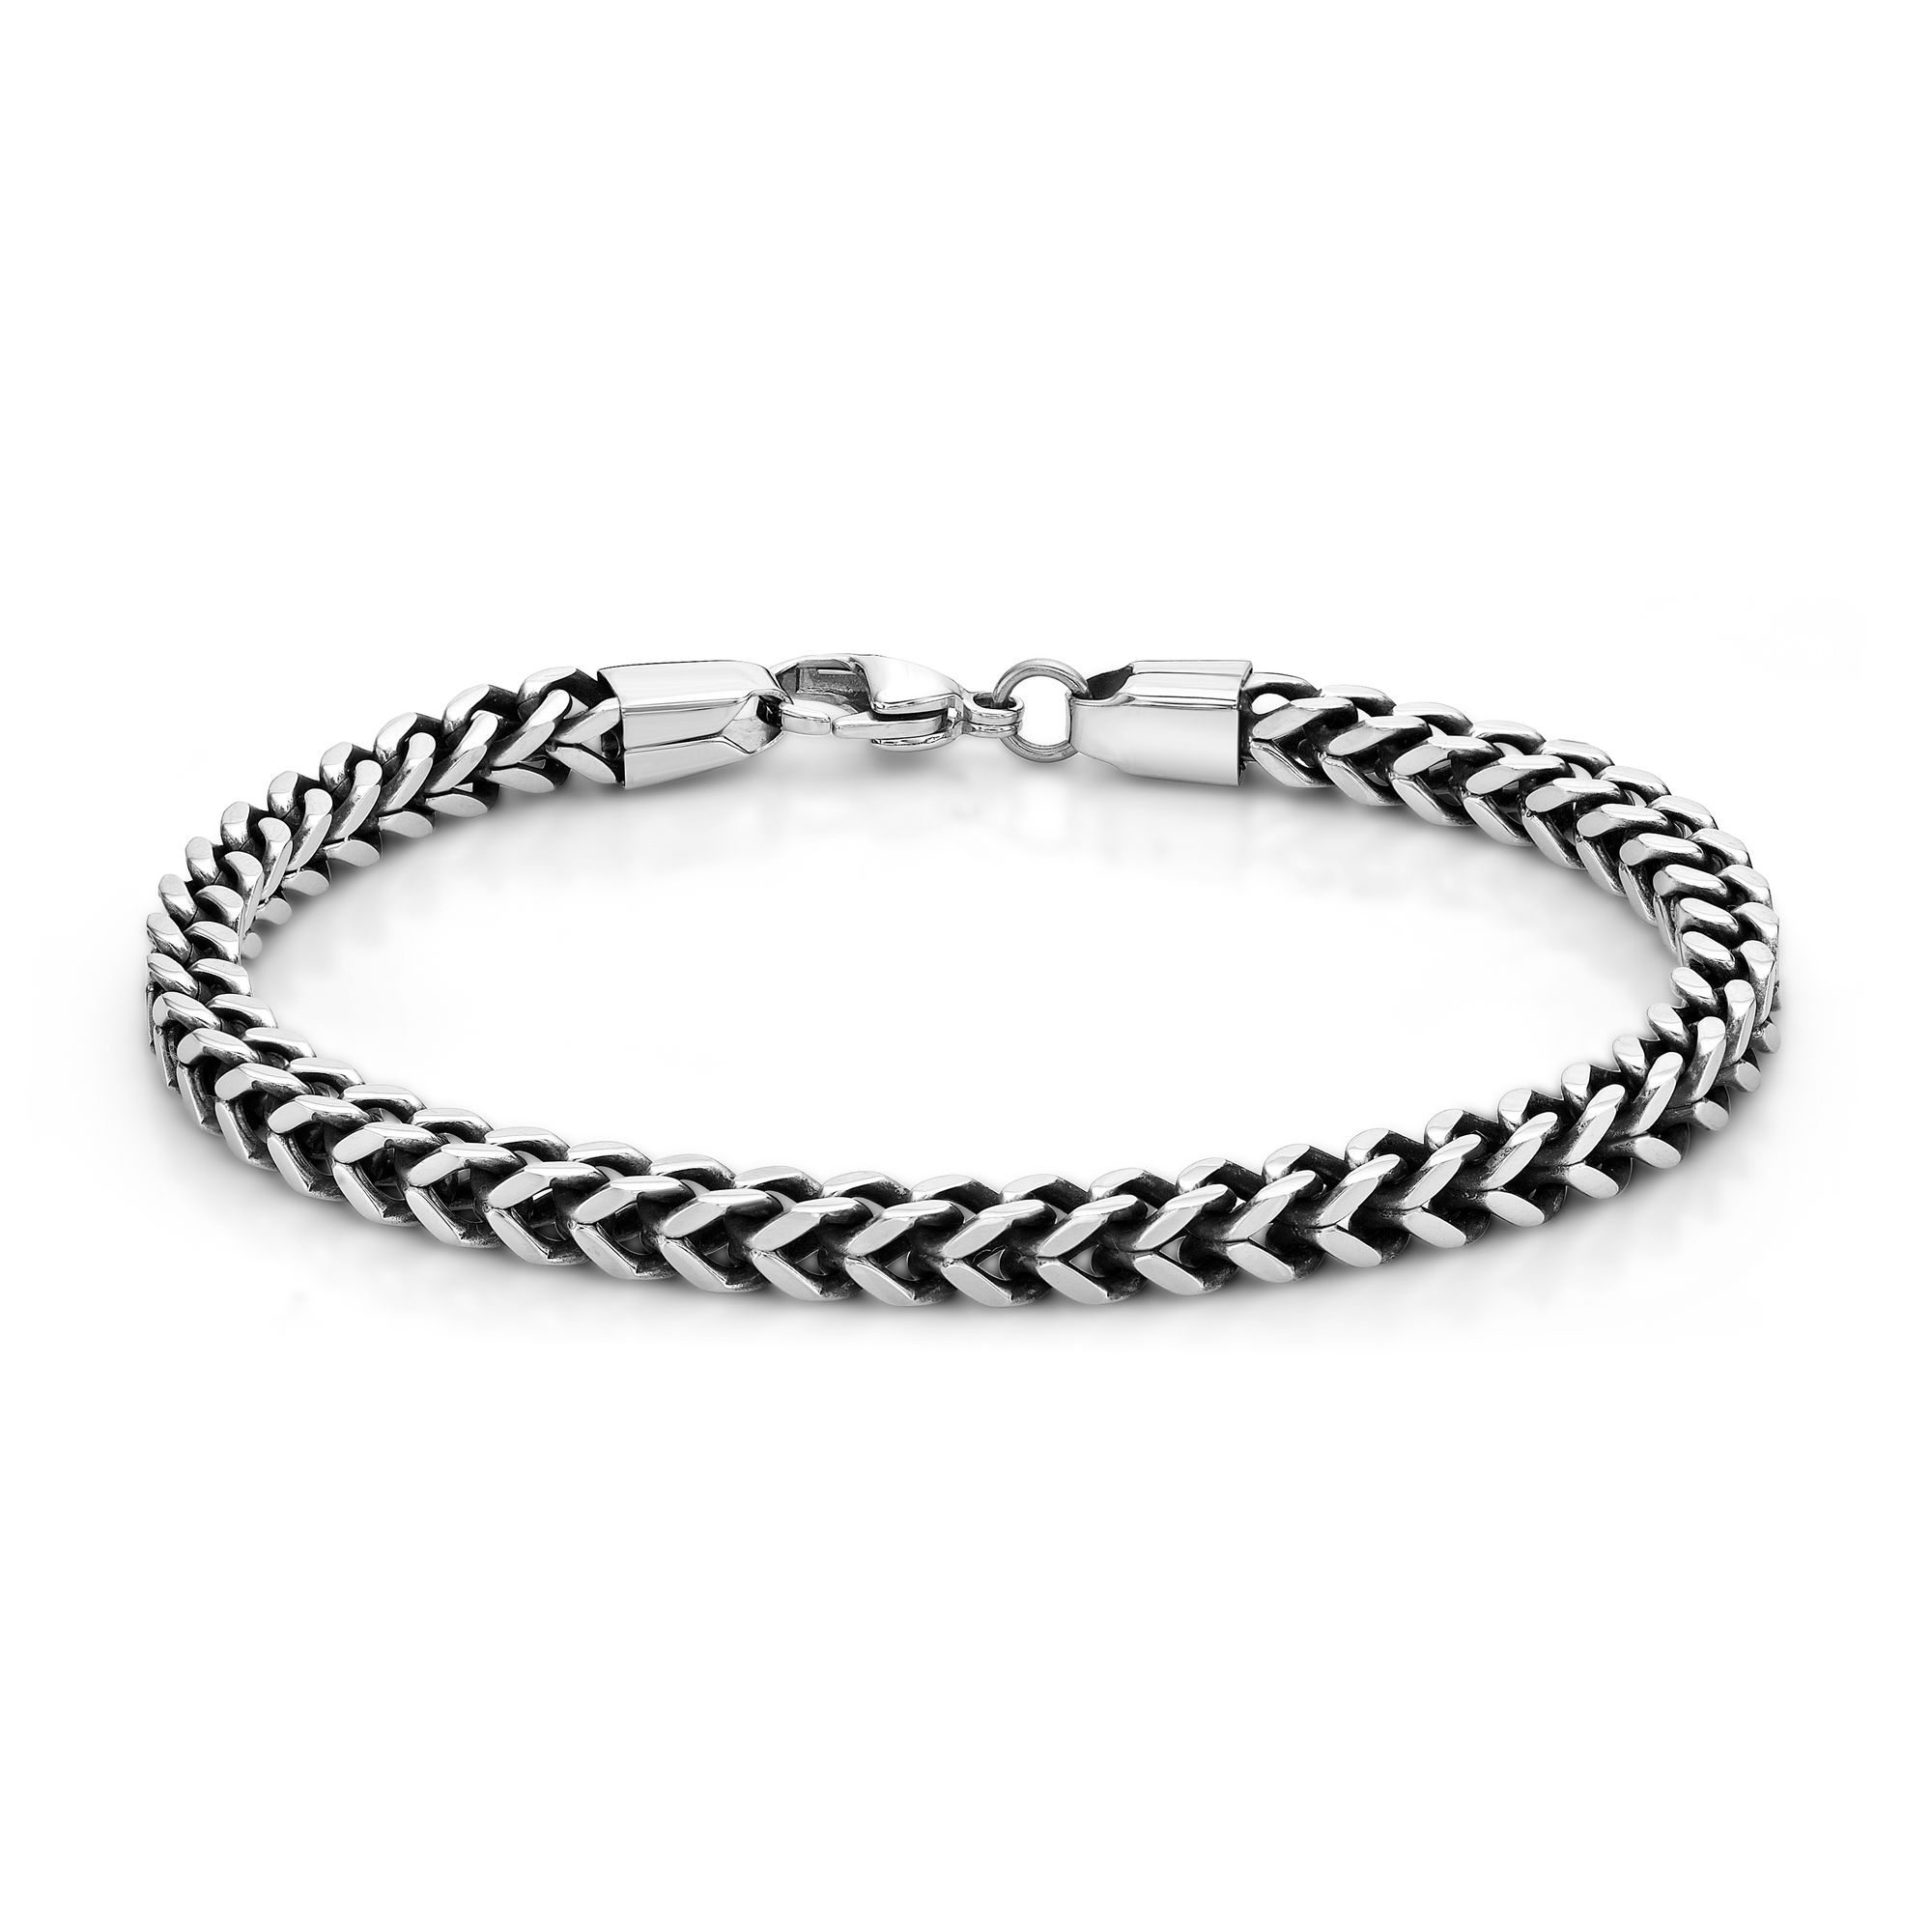 Men's Stainless Steel Antique Ion Plated Thin Foxtail Bracelet - 9 Inch | Metro Jewelry